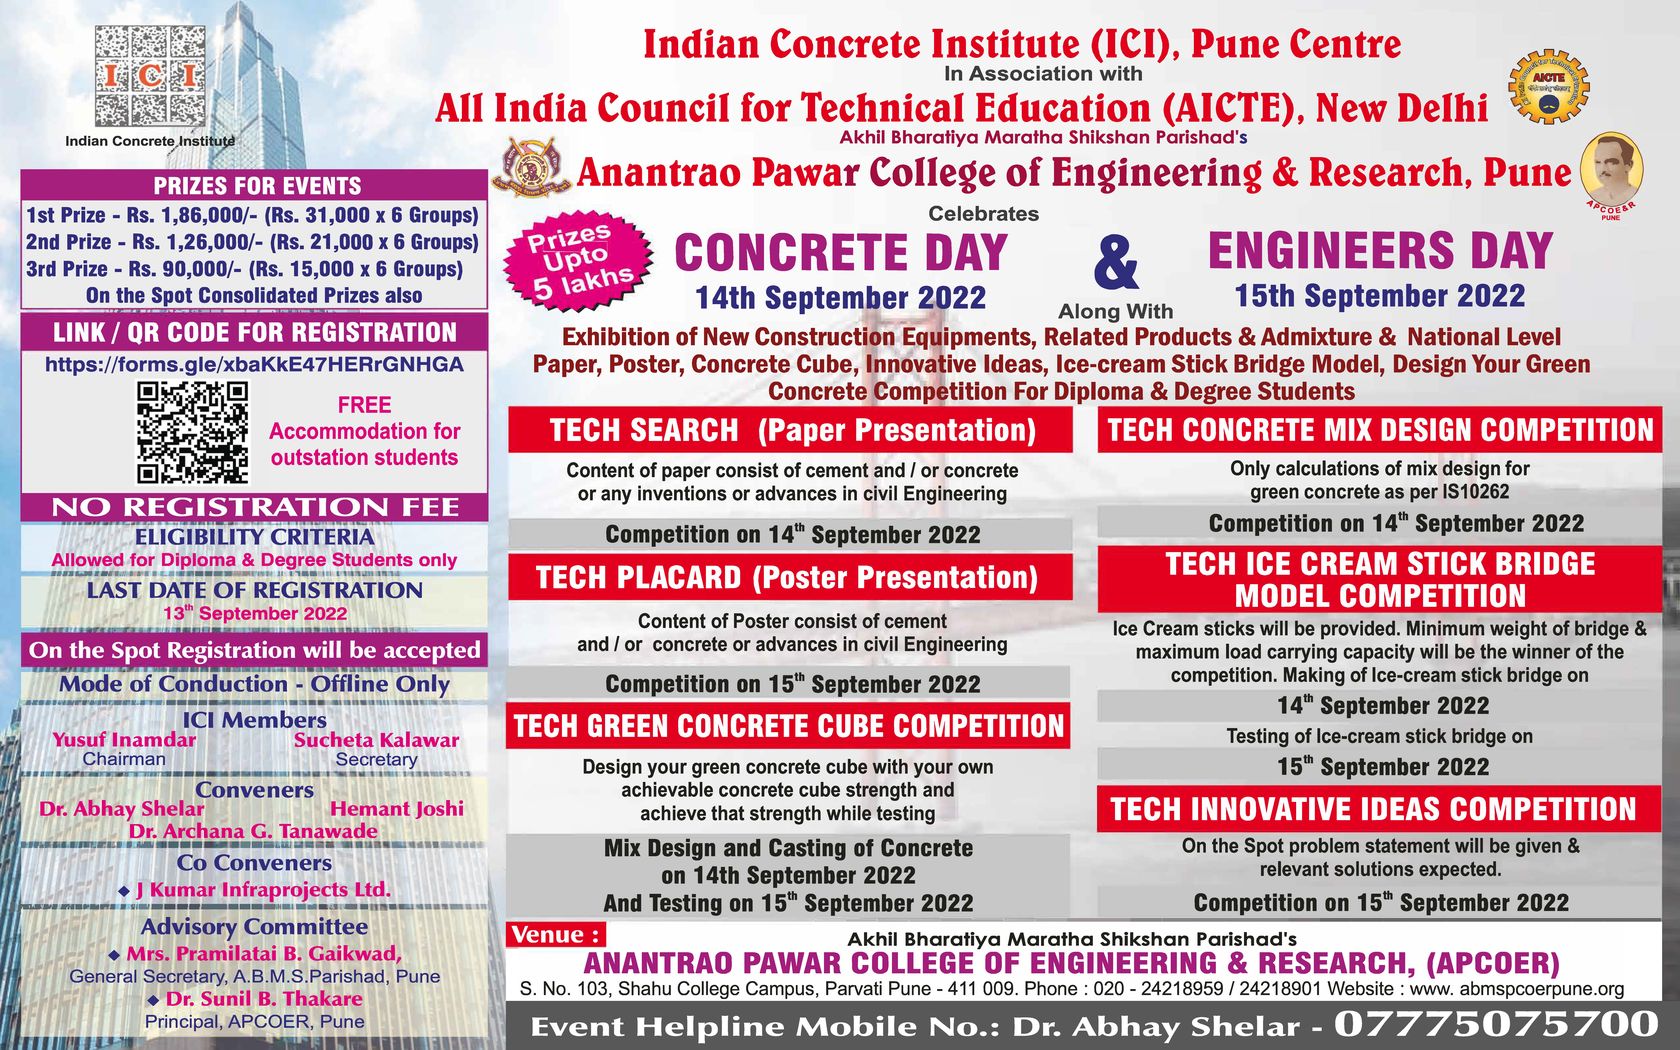 Engineers Day Celebration ICI pune centre